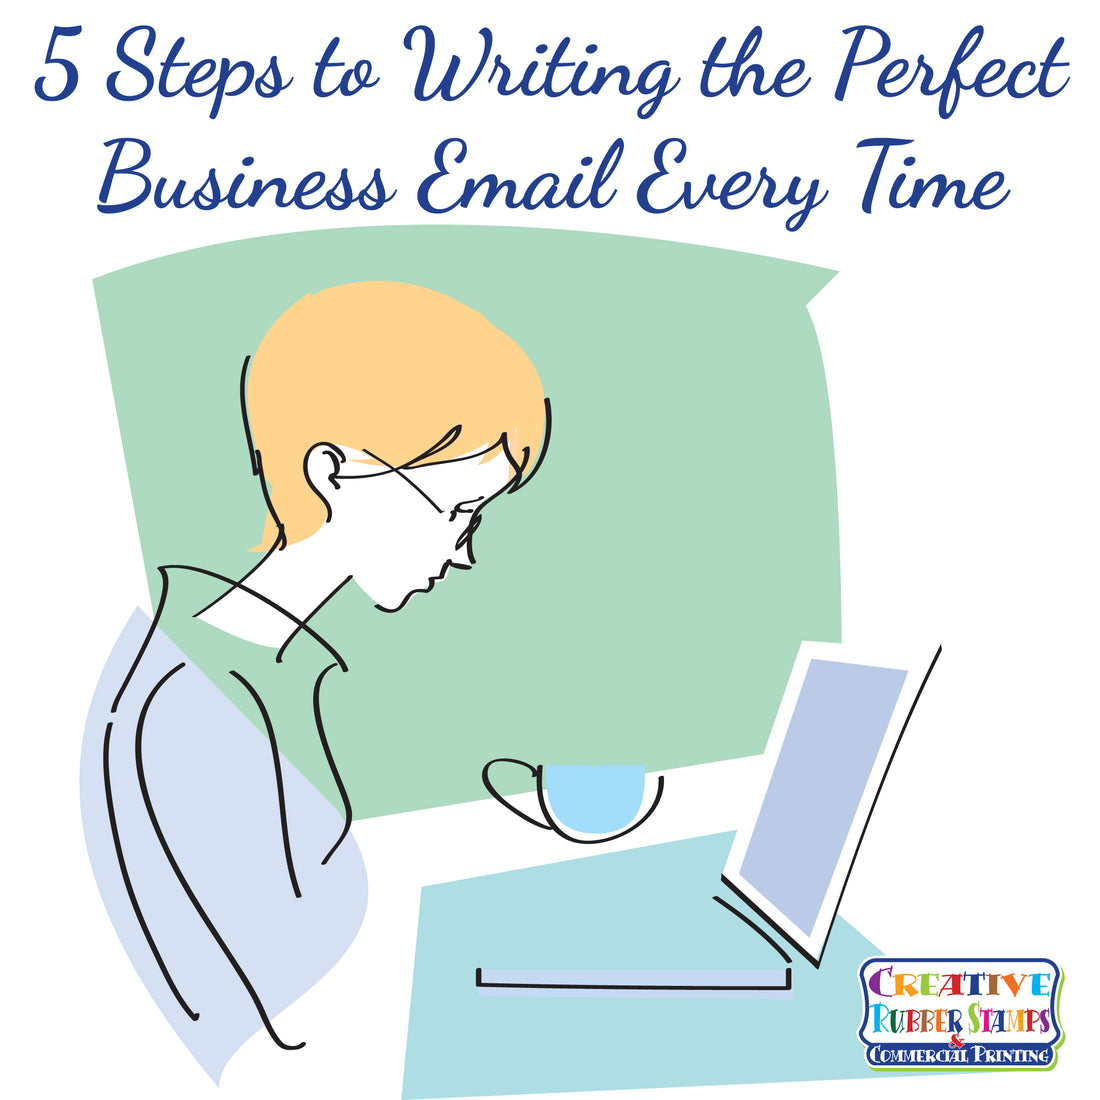 5 Steps to Writing the Perfect Business Email Every Time